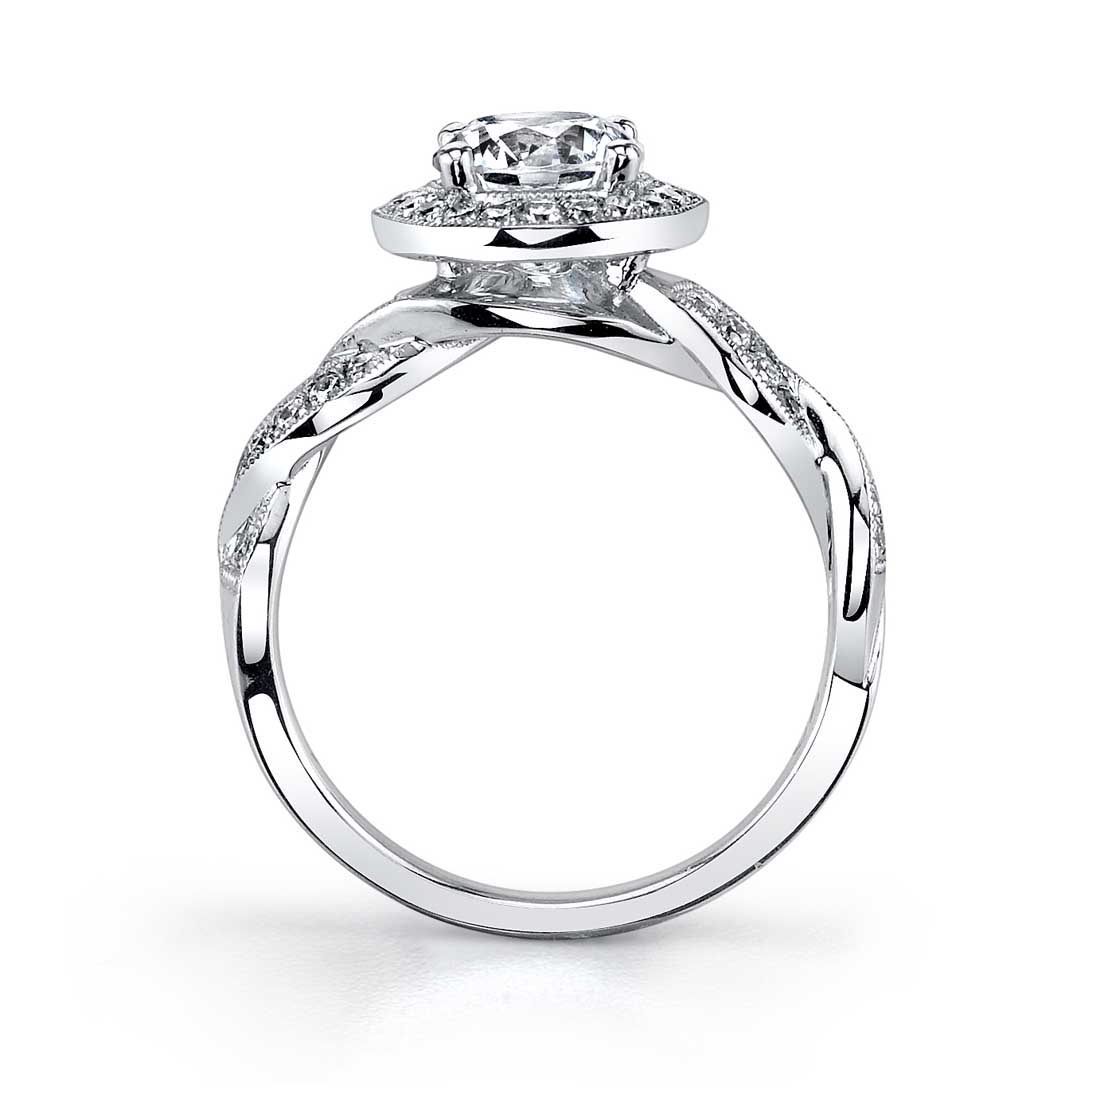 Profile Image of a Spiral Engagement Ring with Halo